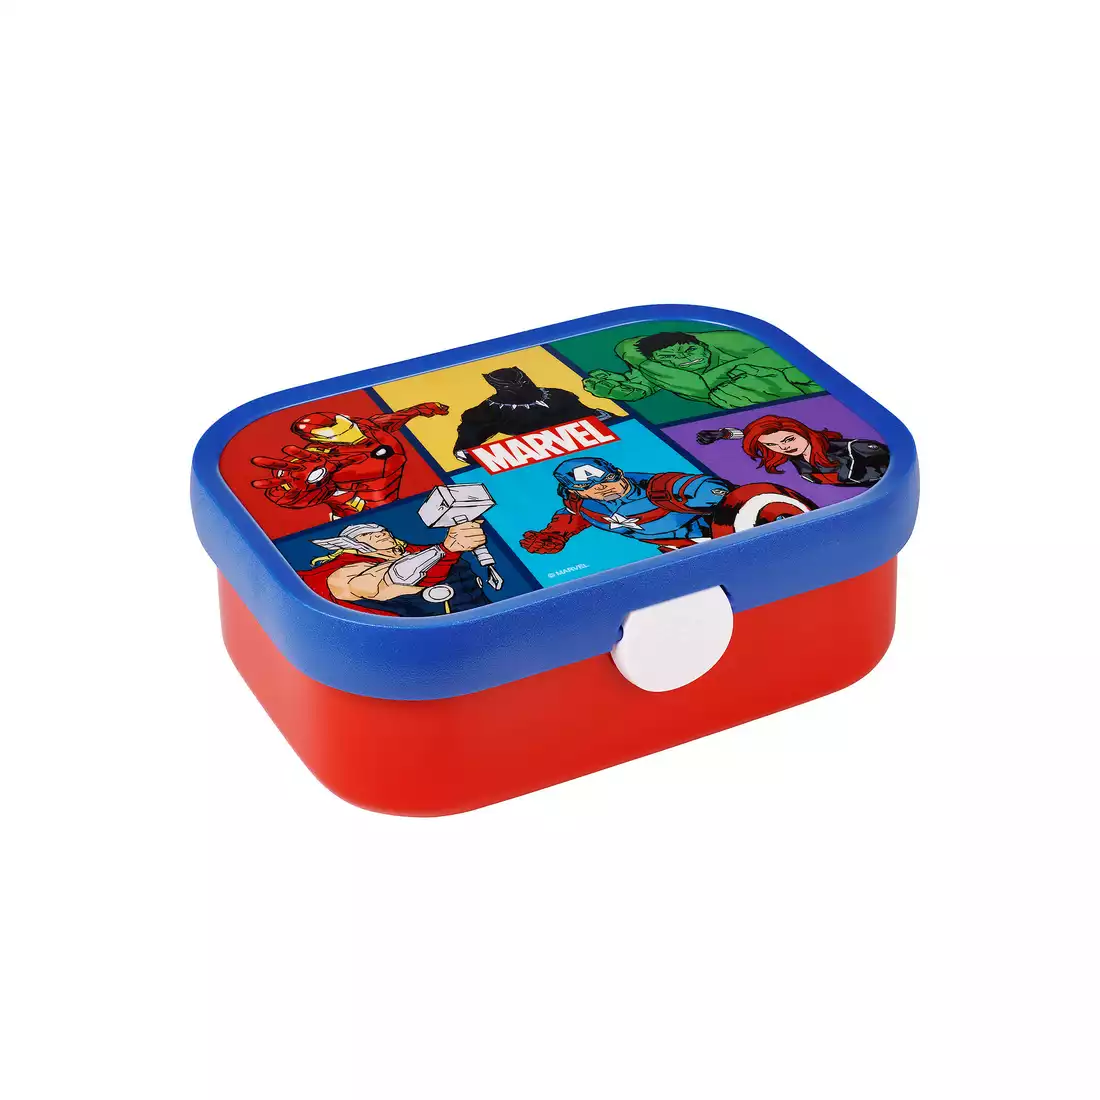 Mepal Campus Avengers children's lunchbox, red and navy blue